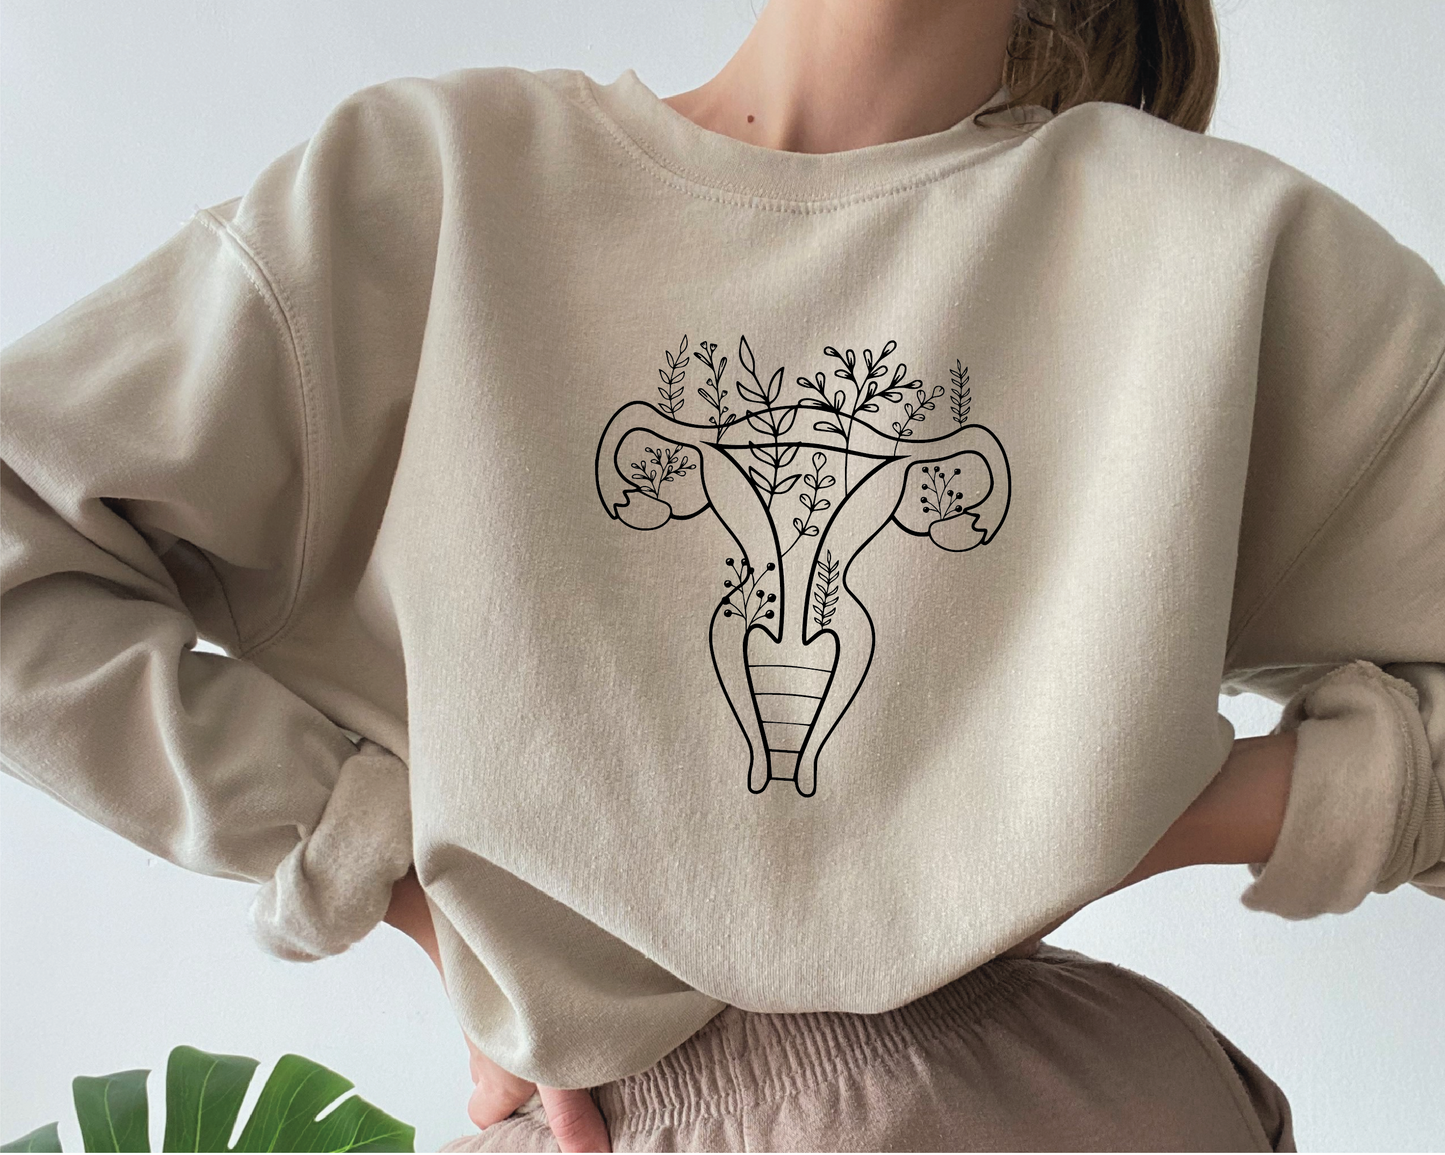 Uterus with Flowers SVG PNG | Floral Uterus | Wildflowers | Feminist T shirt Design Cut file